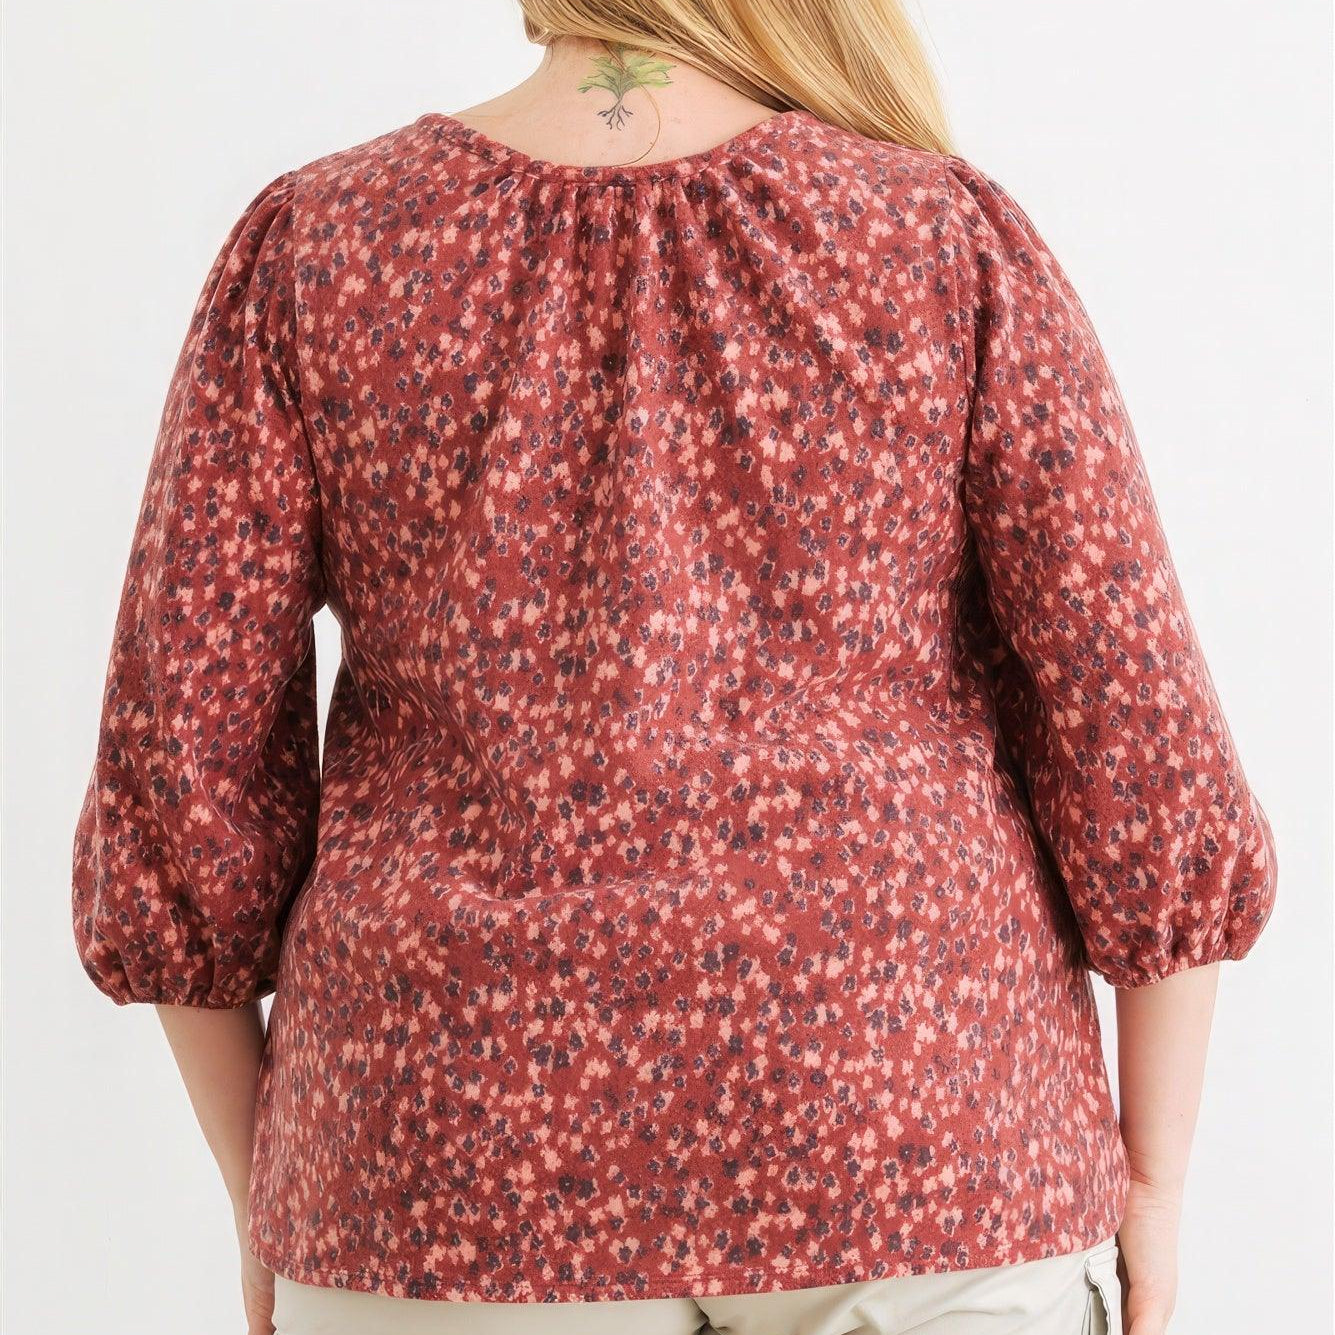 Women's Shirts Plus Burgundy Floral V-neck Midi Sleeve Soft To Touch Top